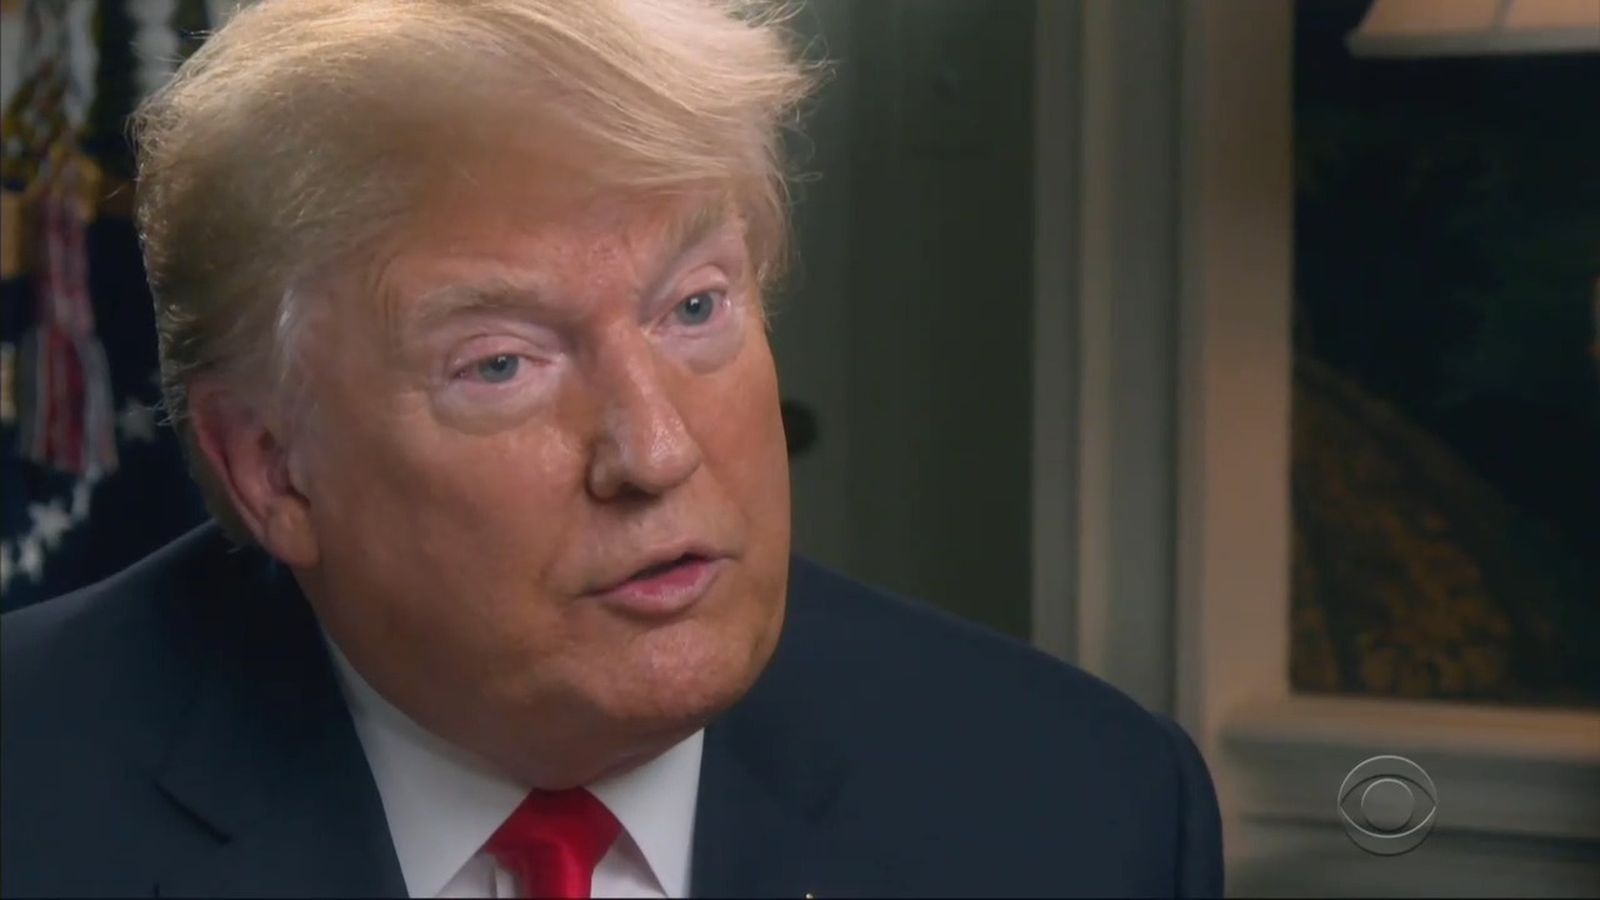 The takeaways from Donald Trump's "60 Minutes" interview